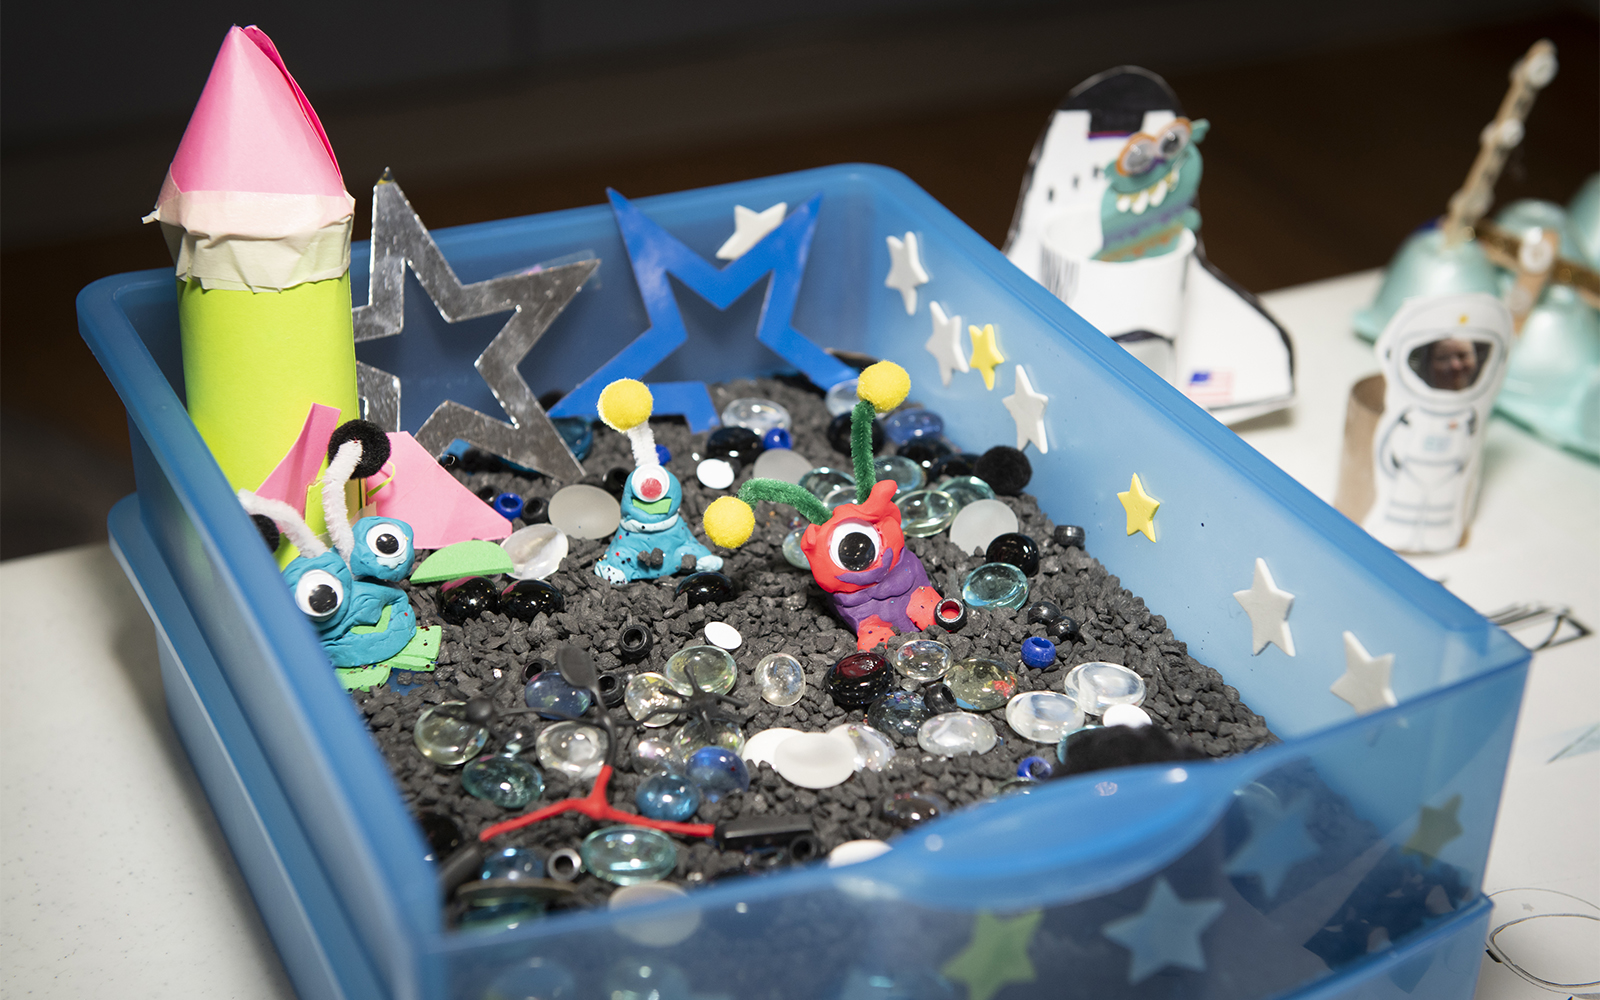 space themed craft at the 2019 SRP workshop